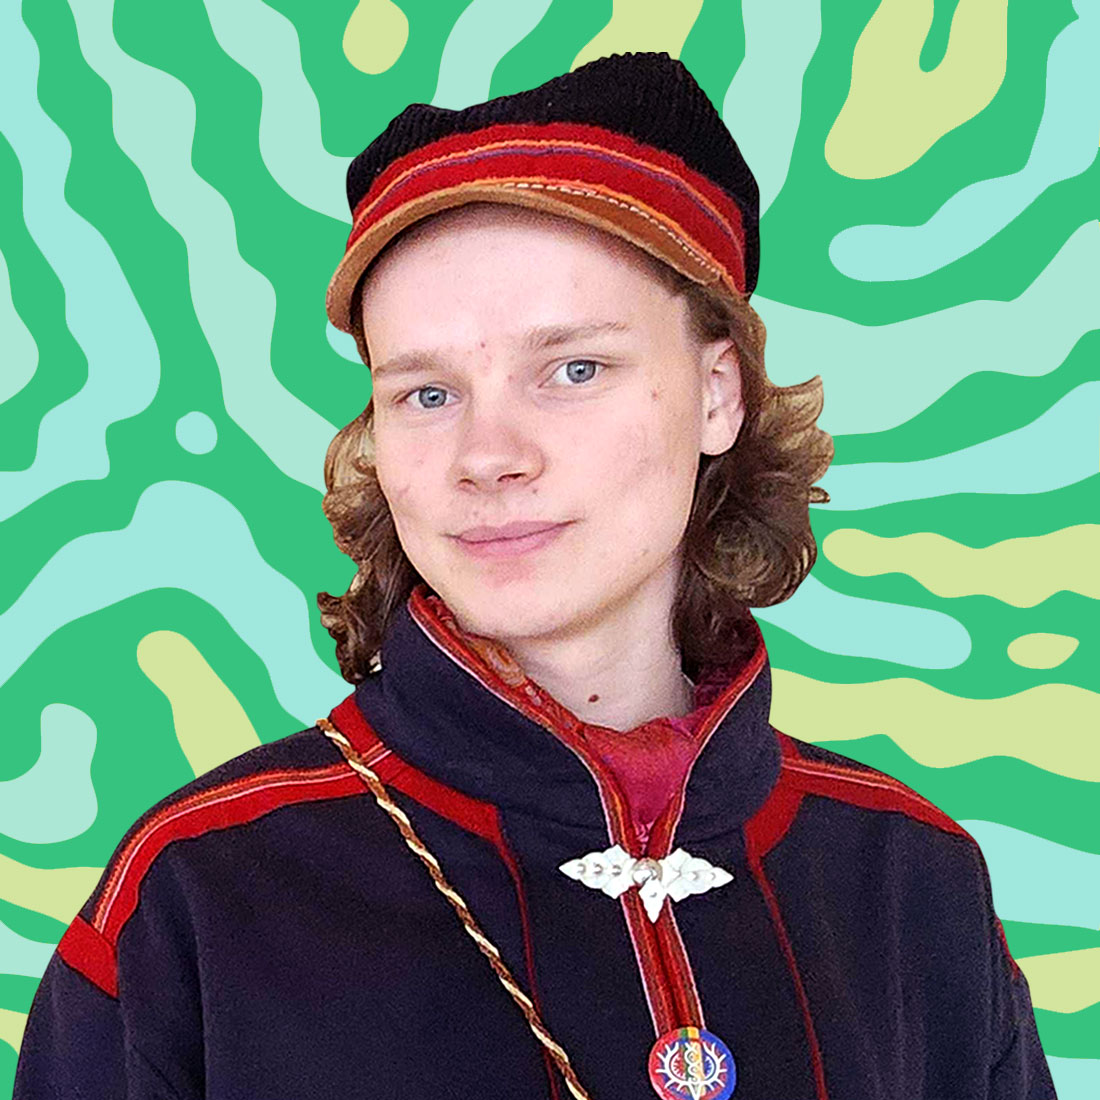 A headshot of a young person in a dark blue and red jacket on a green and yellow striped background